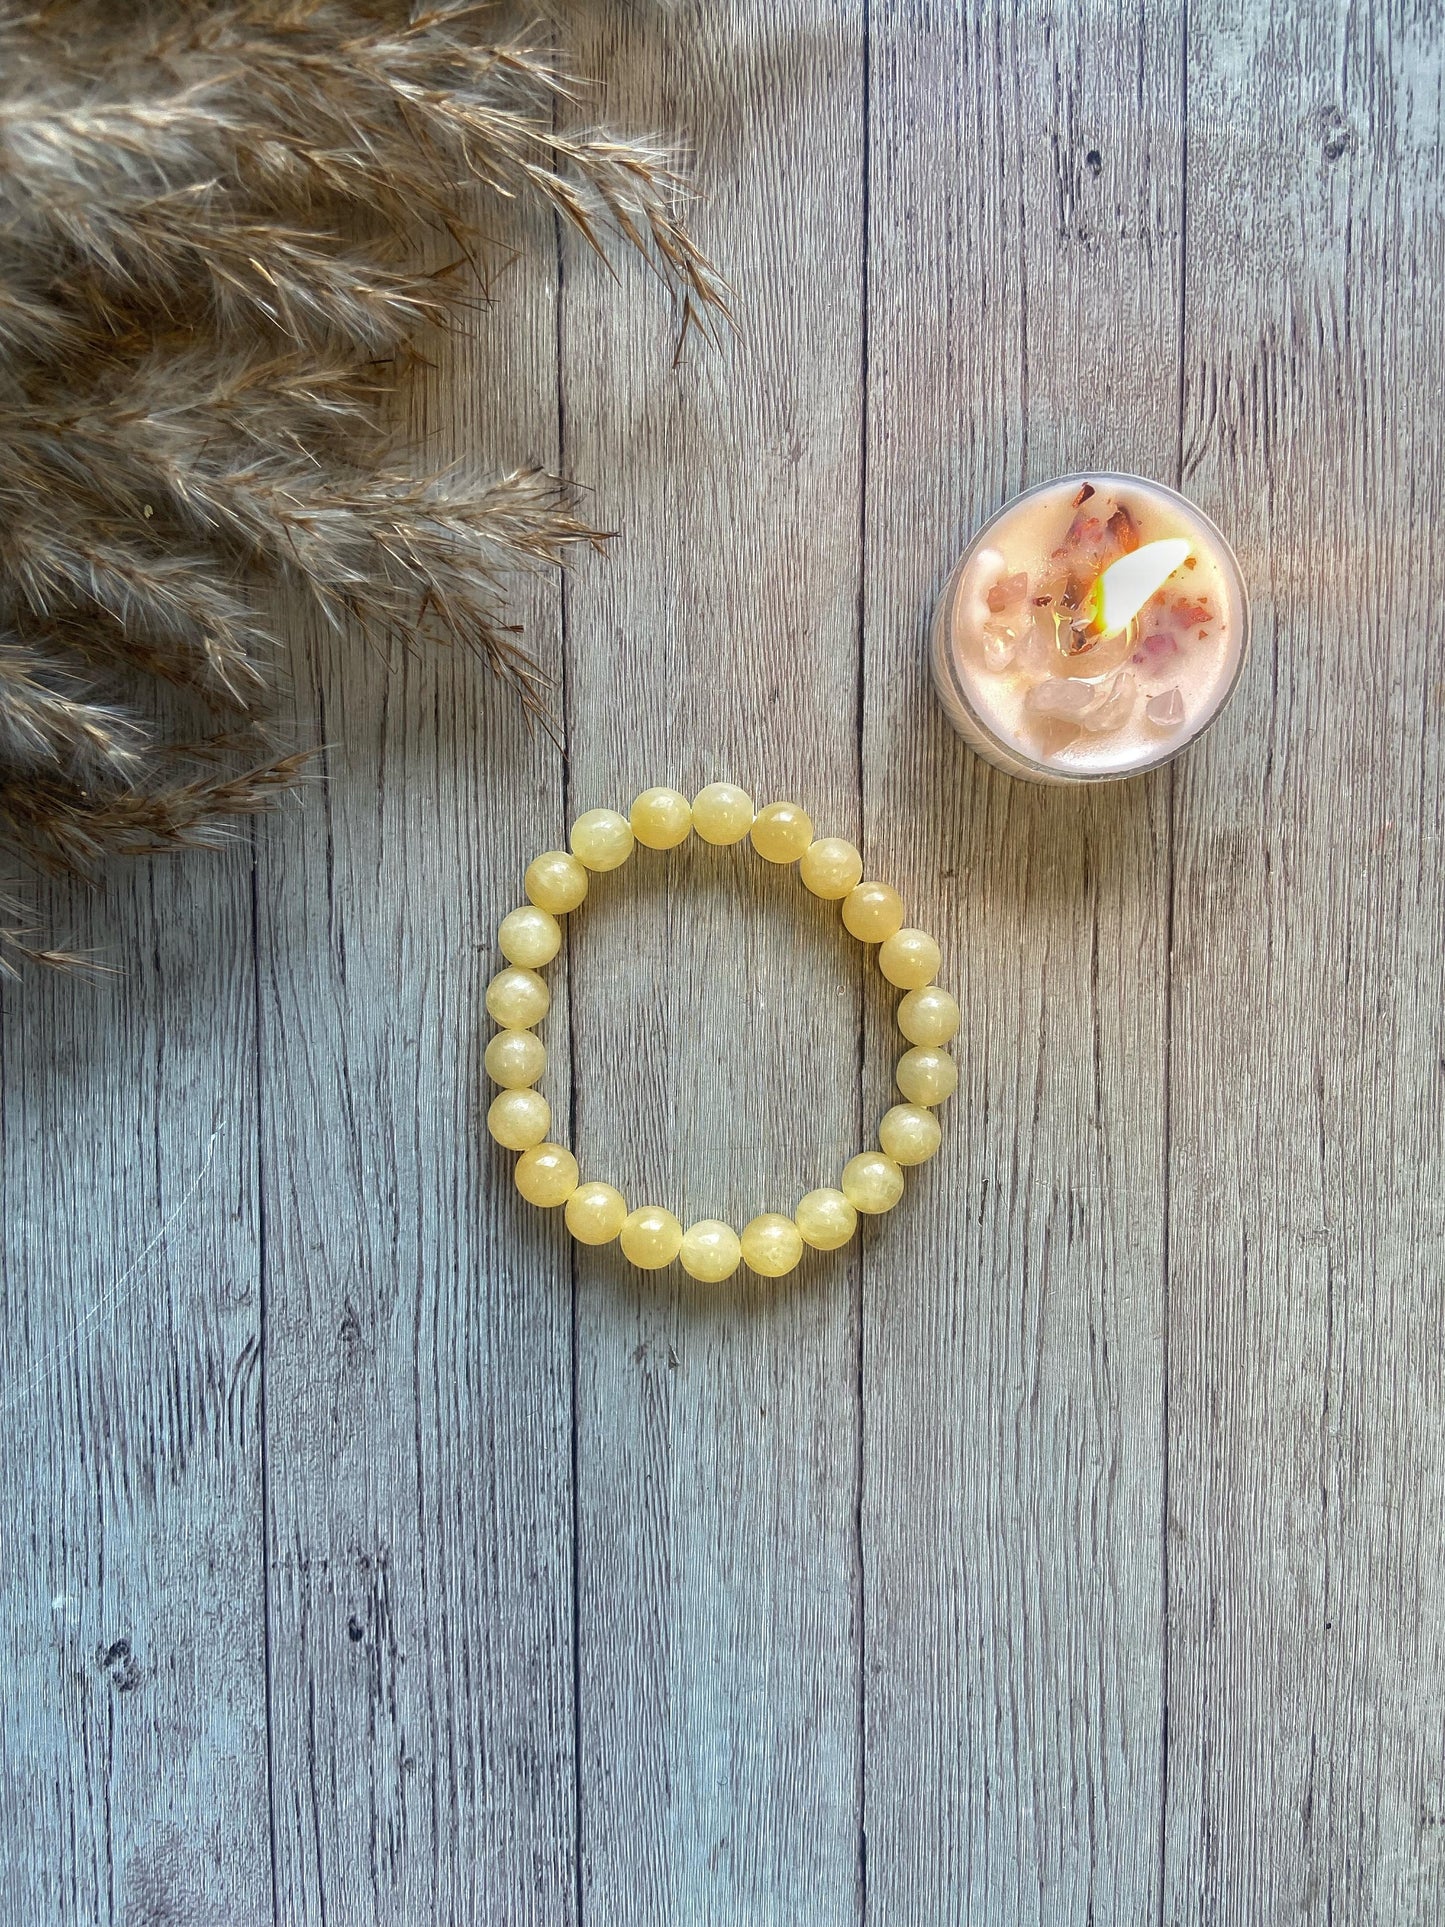 Yellow Calcite Bead Bracelet | Connect With Spirit Guides Crystal & Stones